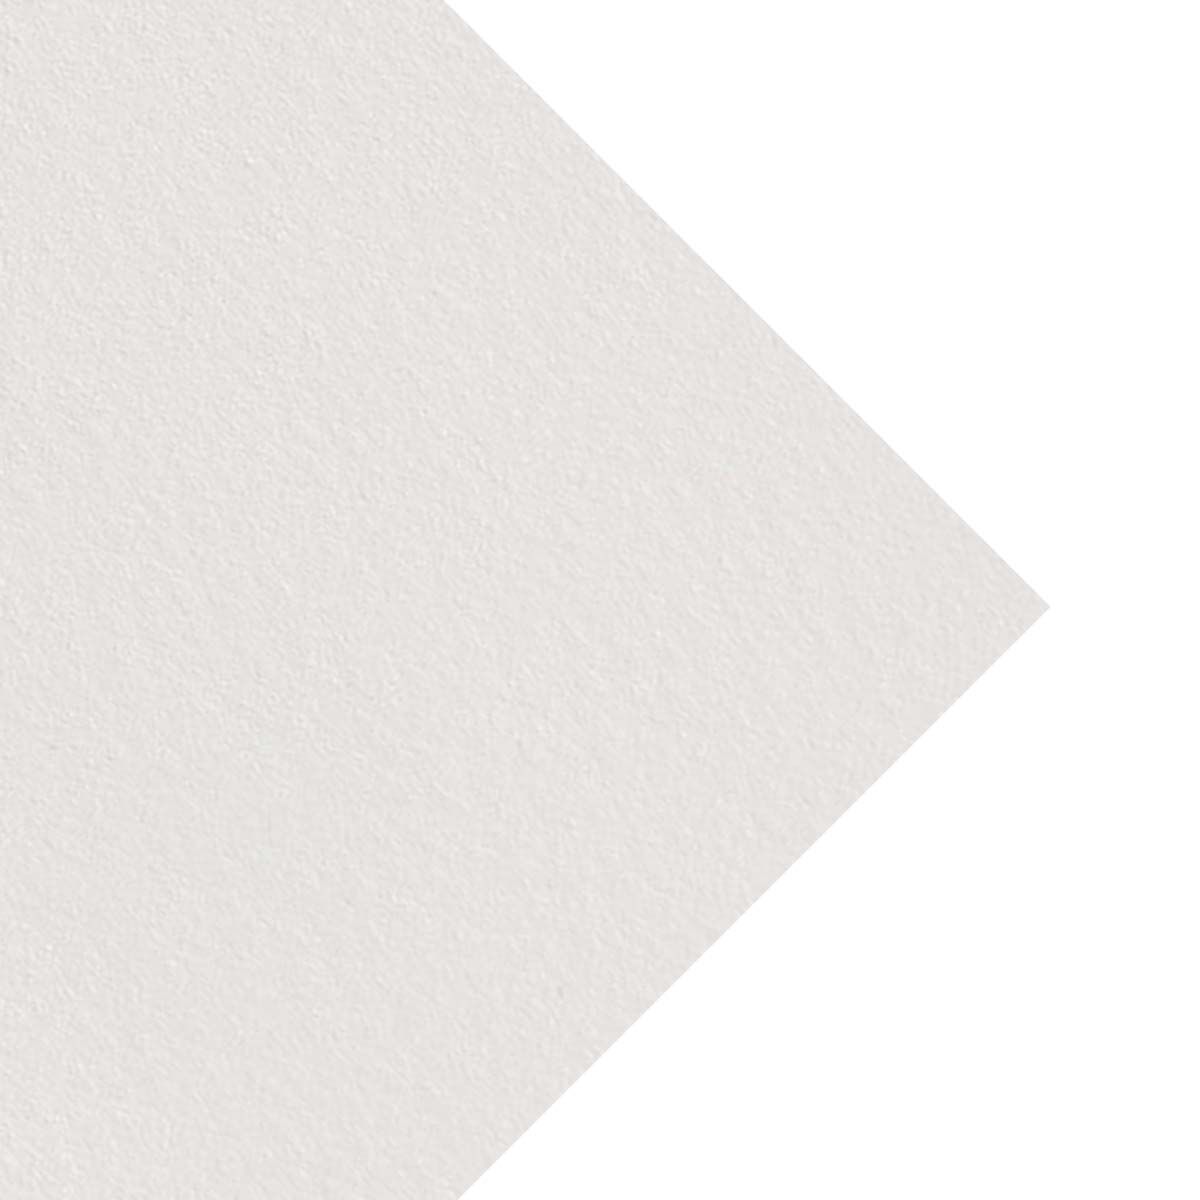 Waterford Watercolor Paper 140 lb Hot Press 22" x 30" (Pack of 10)